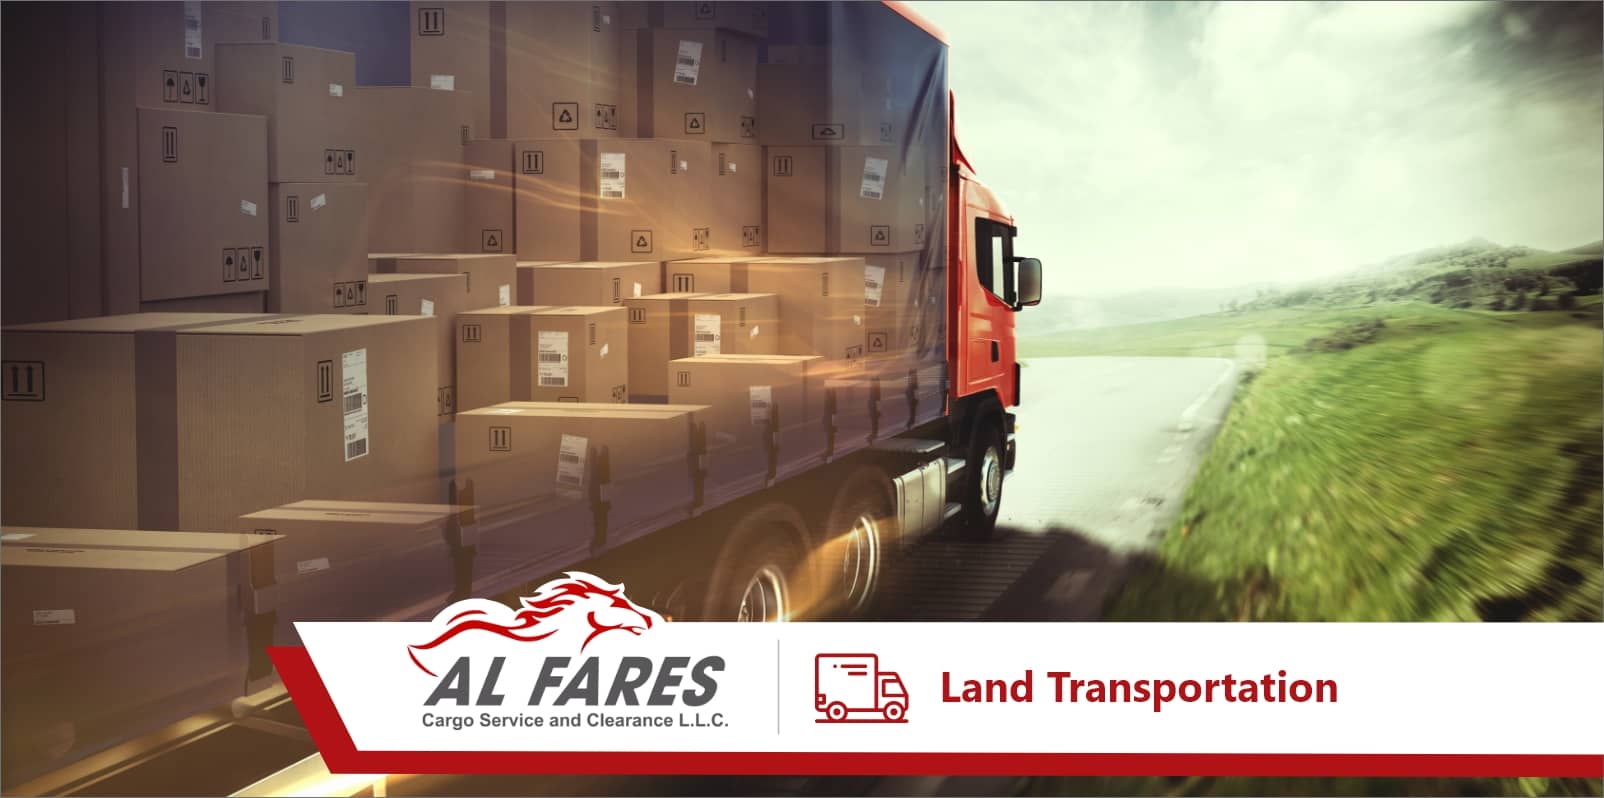 Land Freight And Road Transport